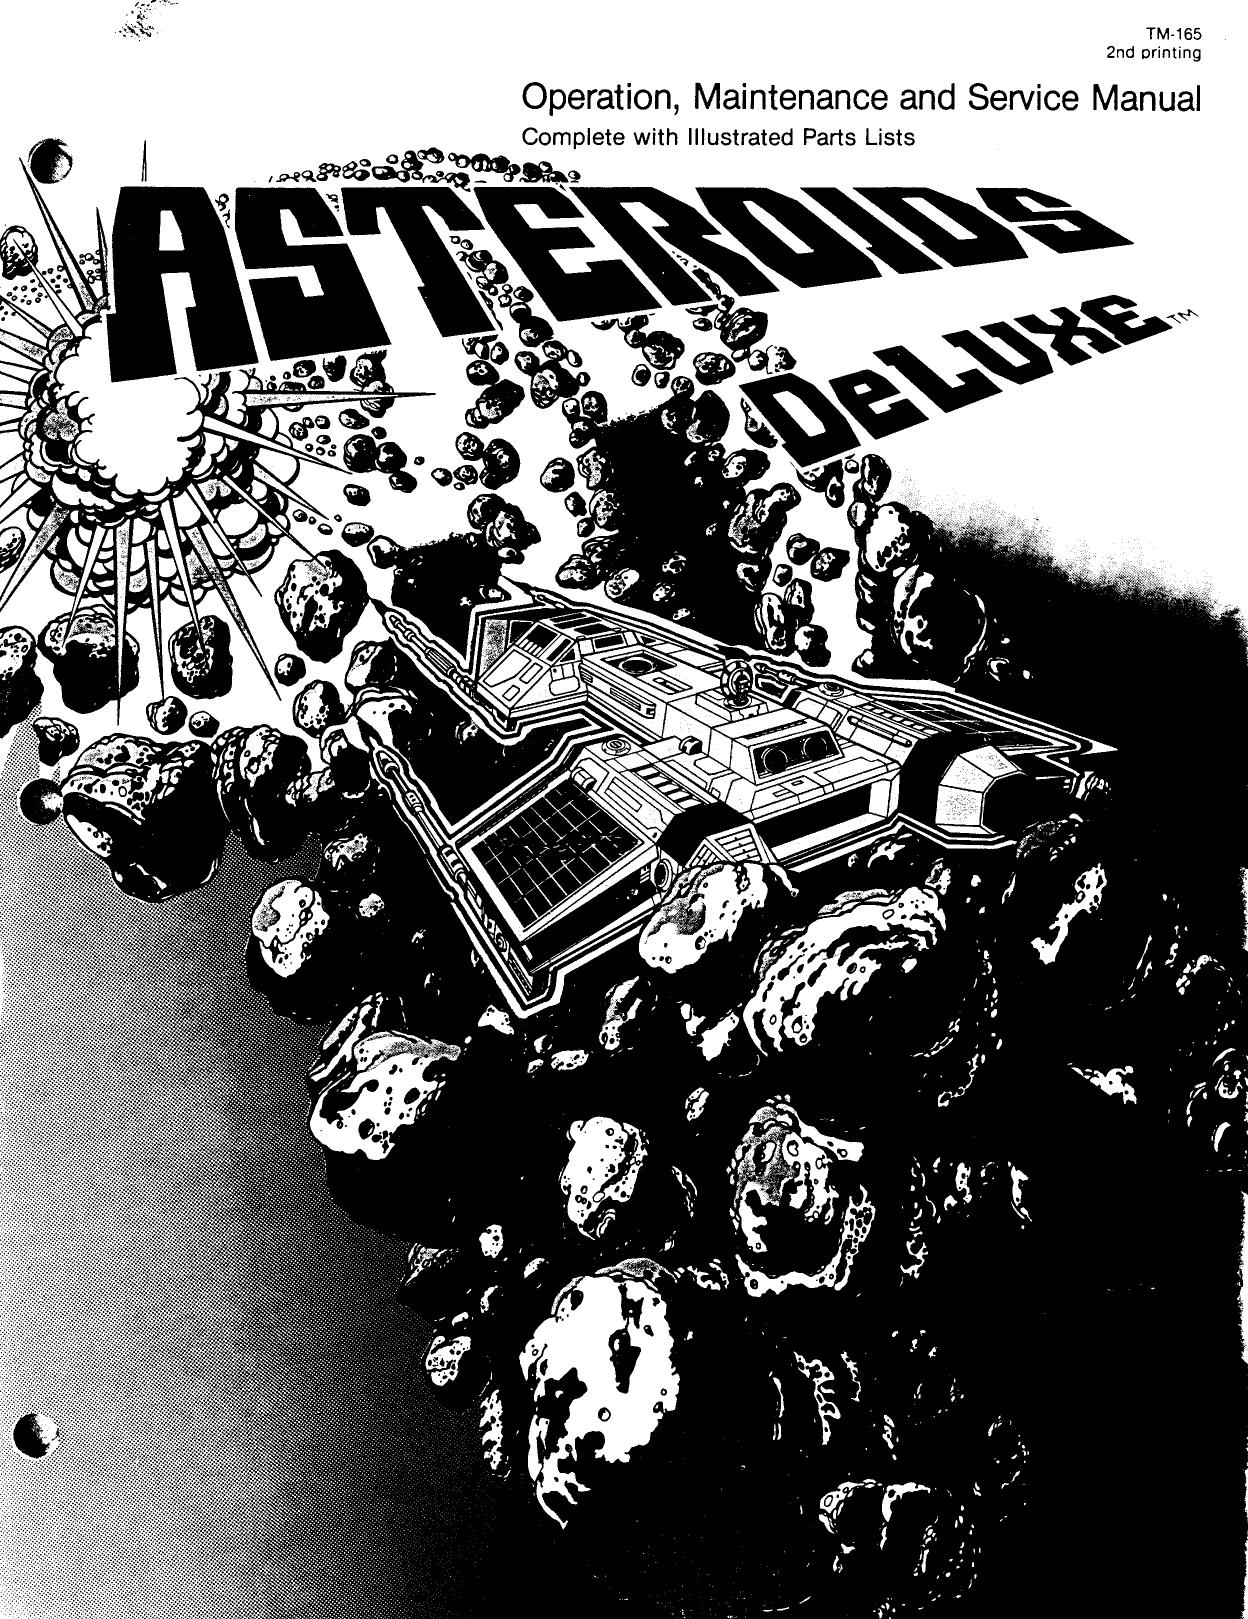 Asteroids Deluxe TM-165 2nd Printing